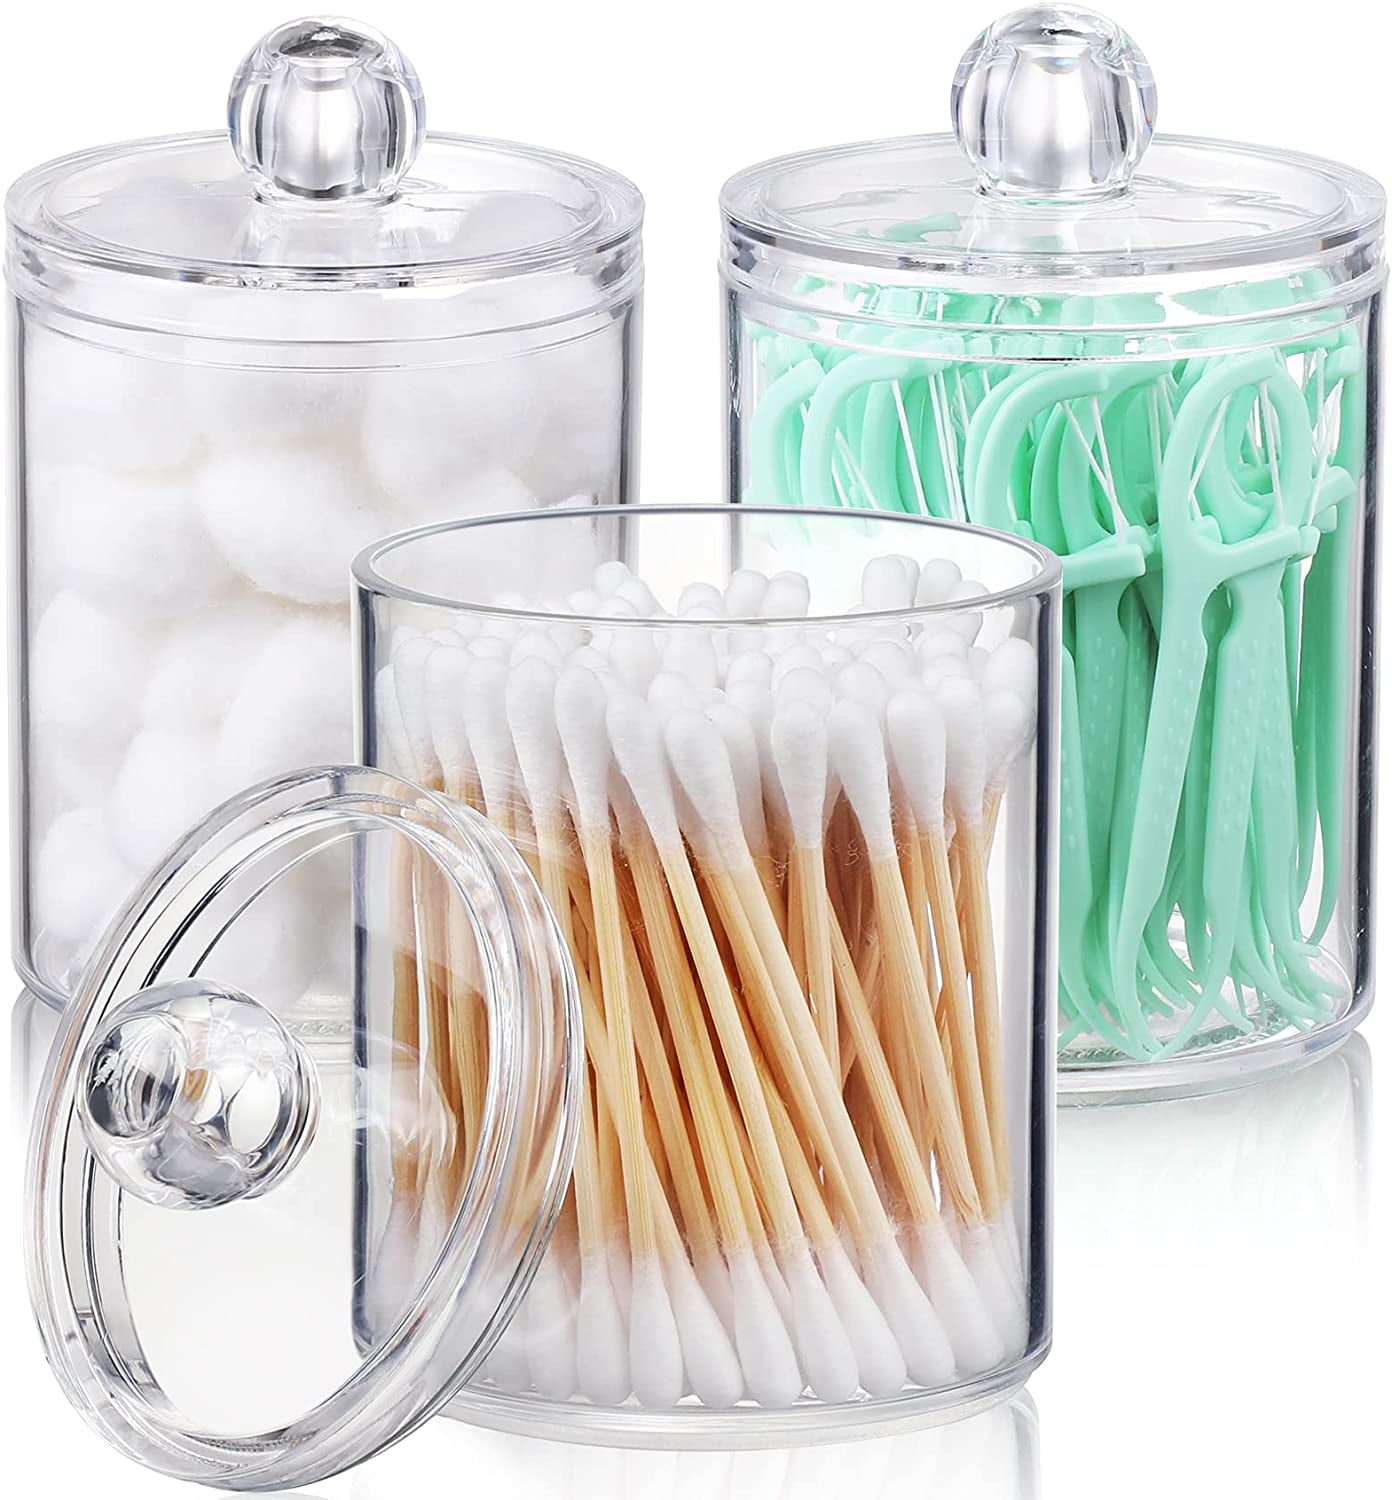 Canister Jars Organizer Storage Bathroom Home Office Set 2 QTips Cotton Ball NEW 